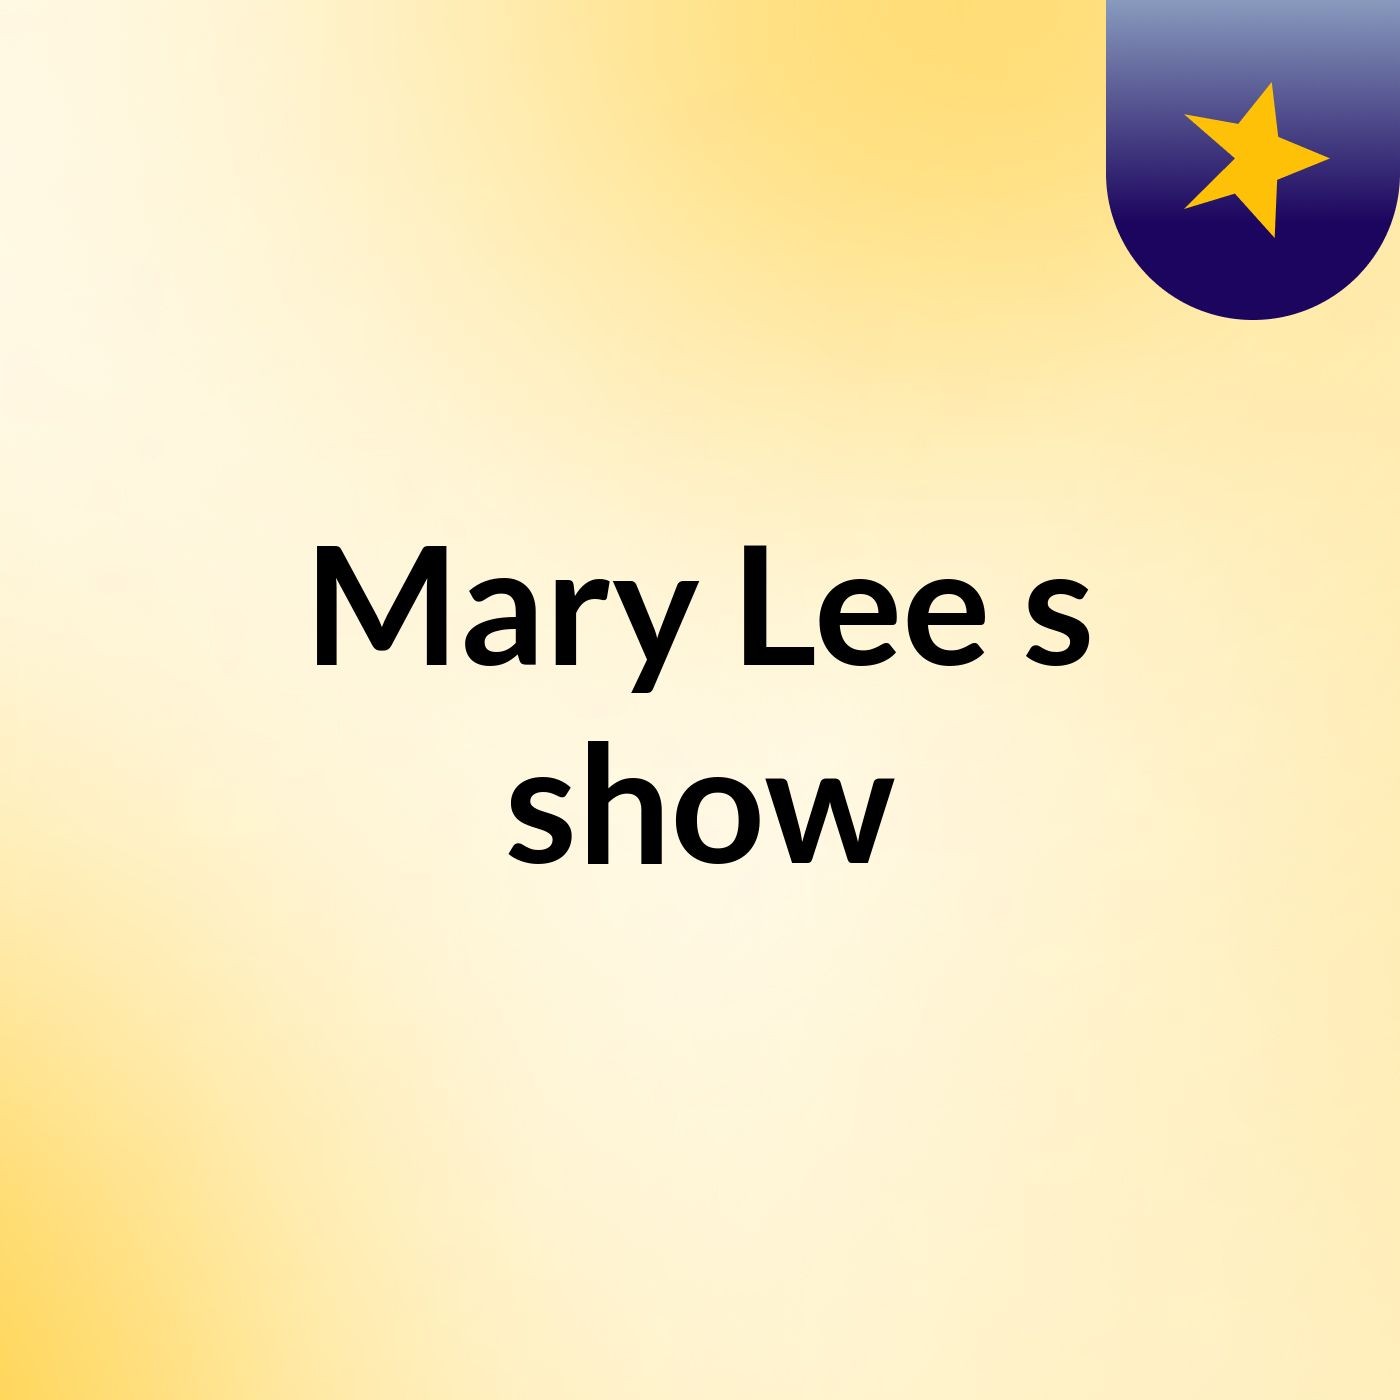 Mary Lee's show